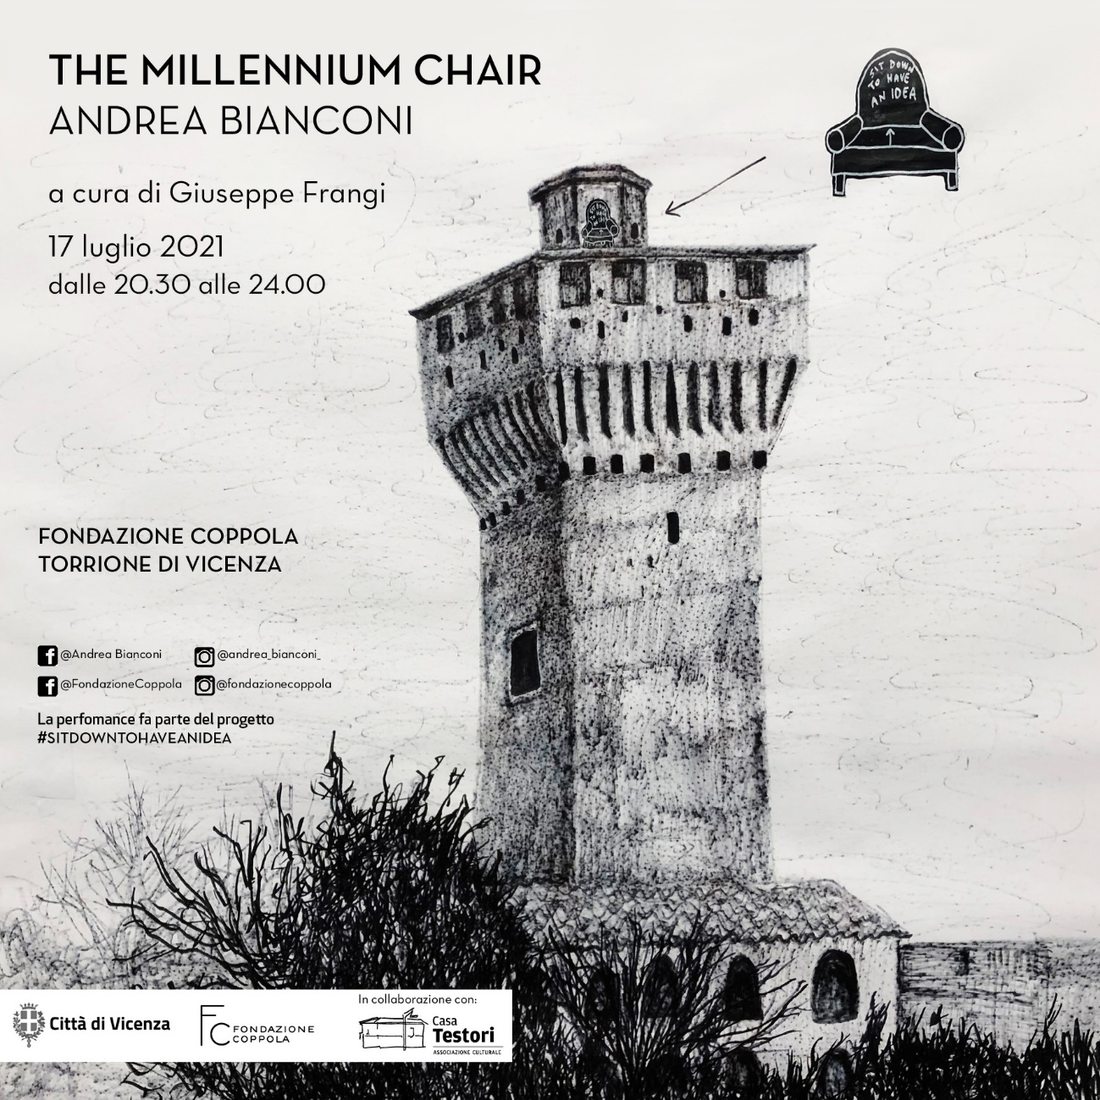 THE MILLENNIUM CHAIR by Andrea Bianconi